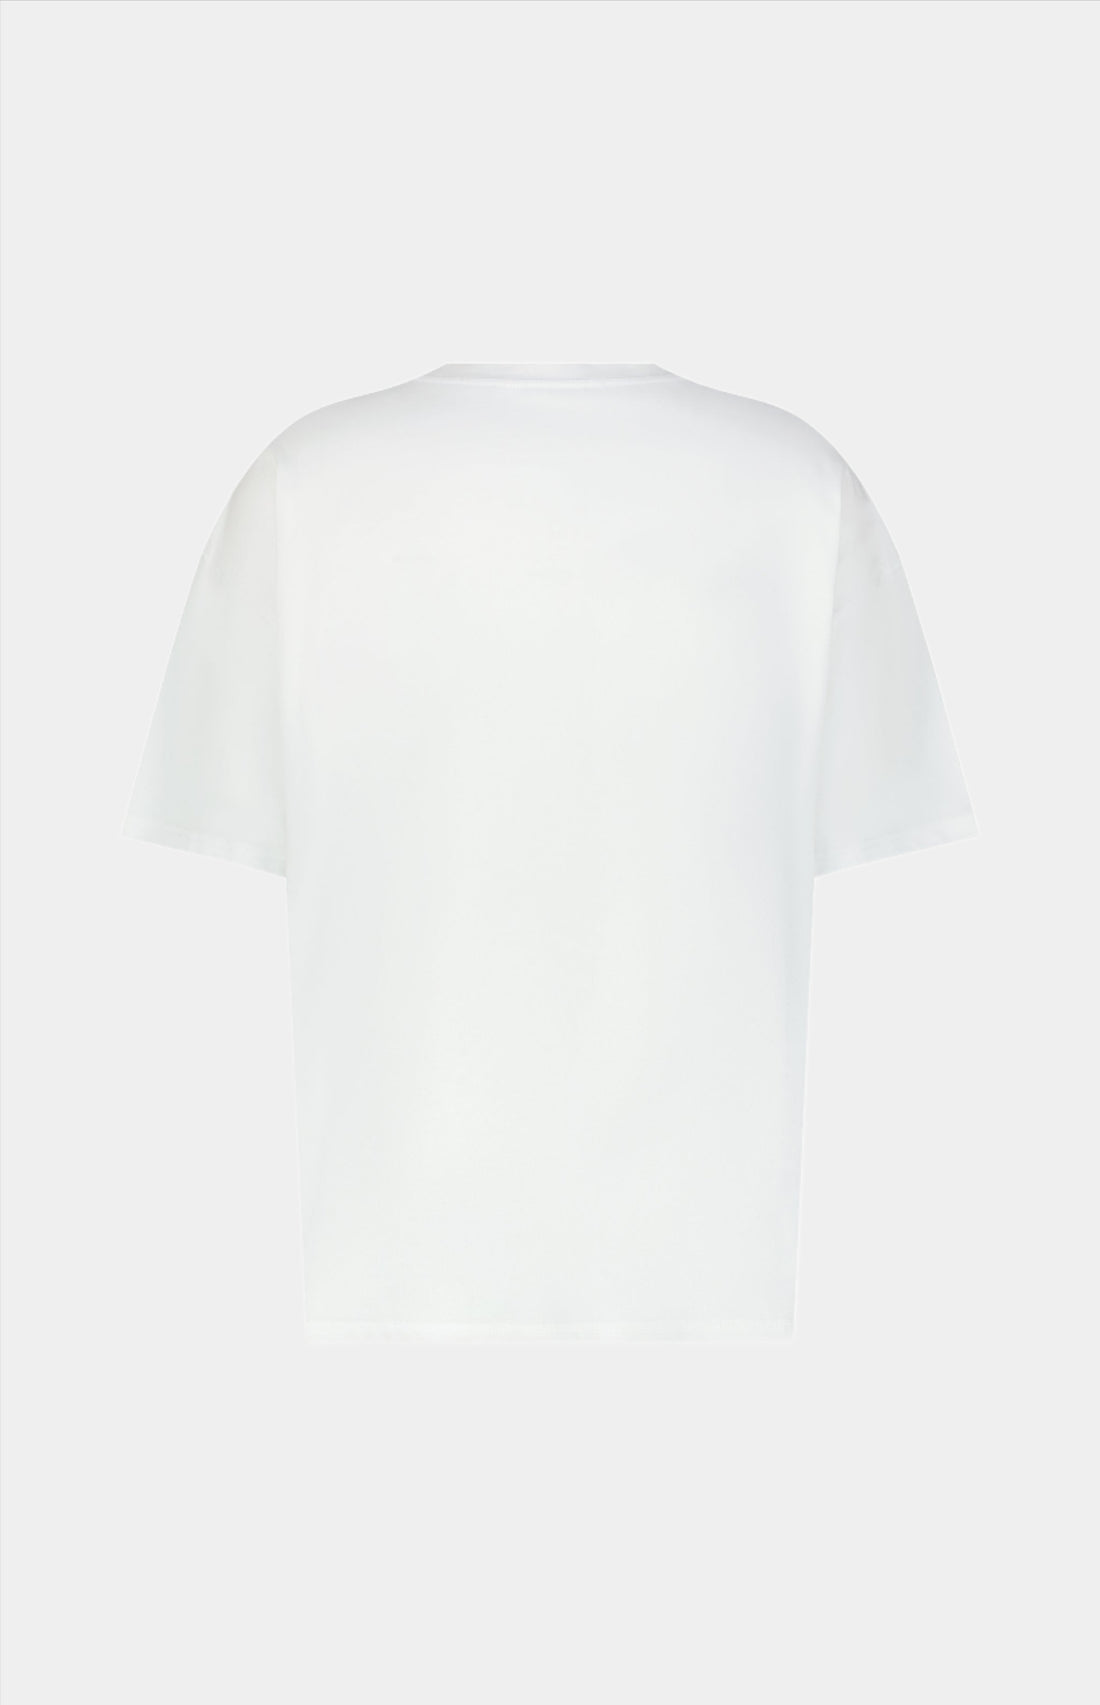 Premium Streetwear Heavy-weight T-Shirt. Expertly crafted in Portugal. Located in Dubai.